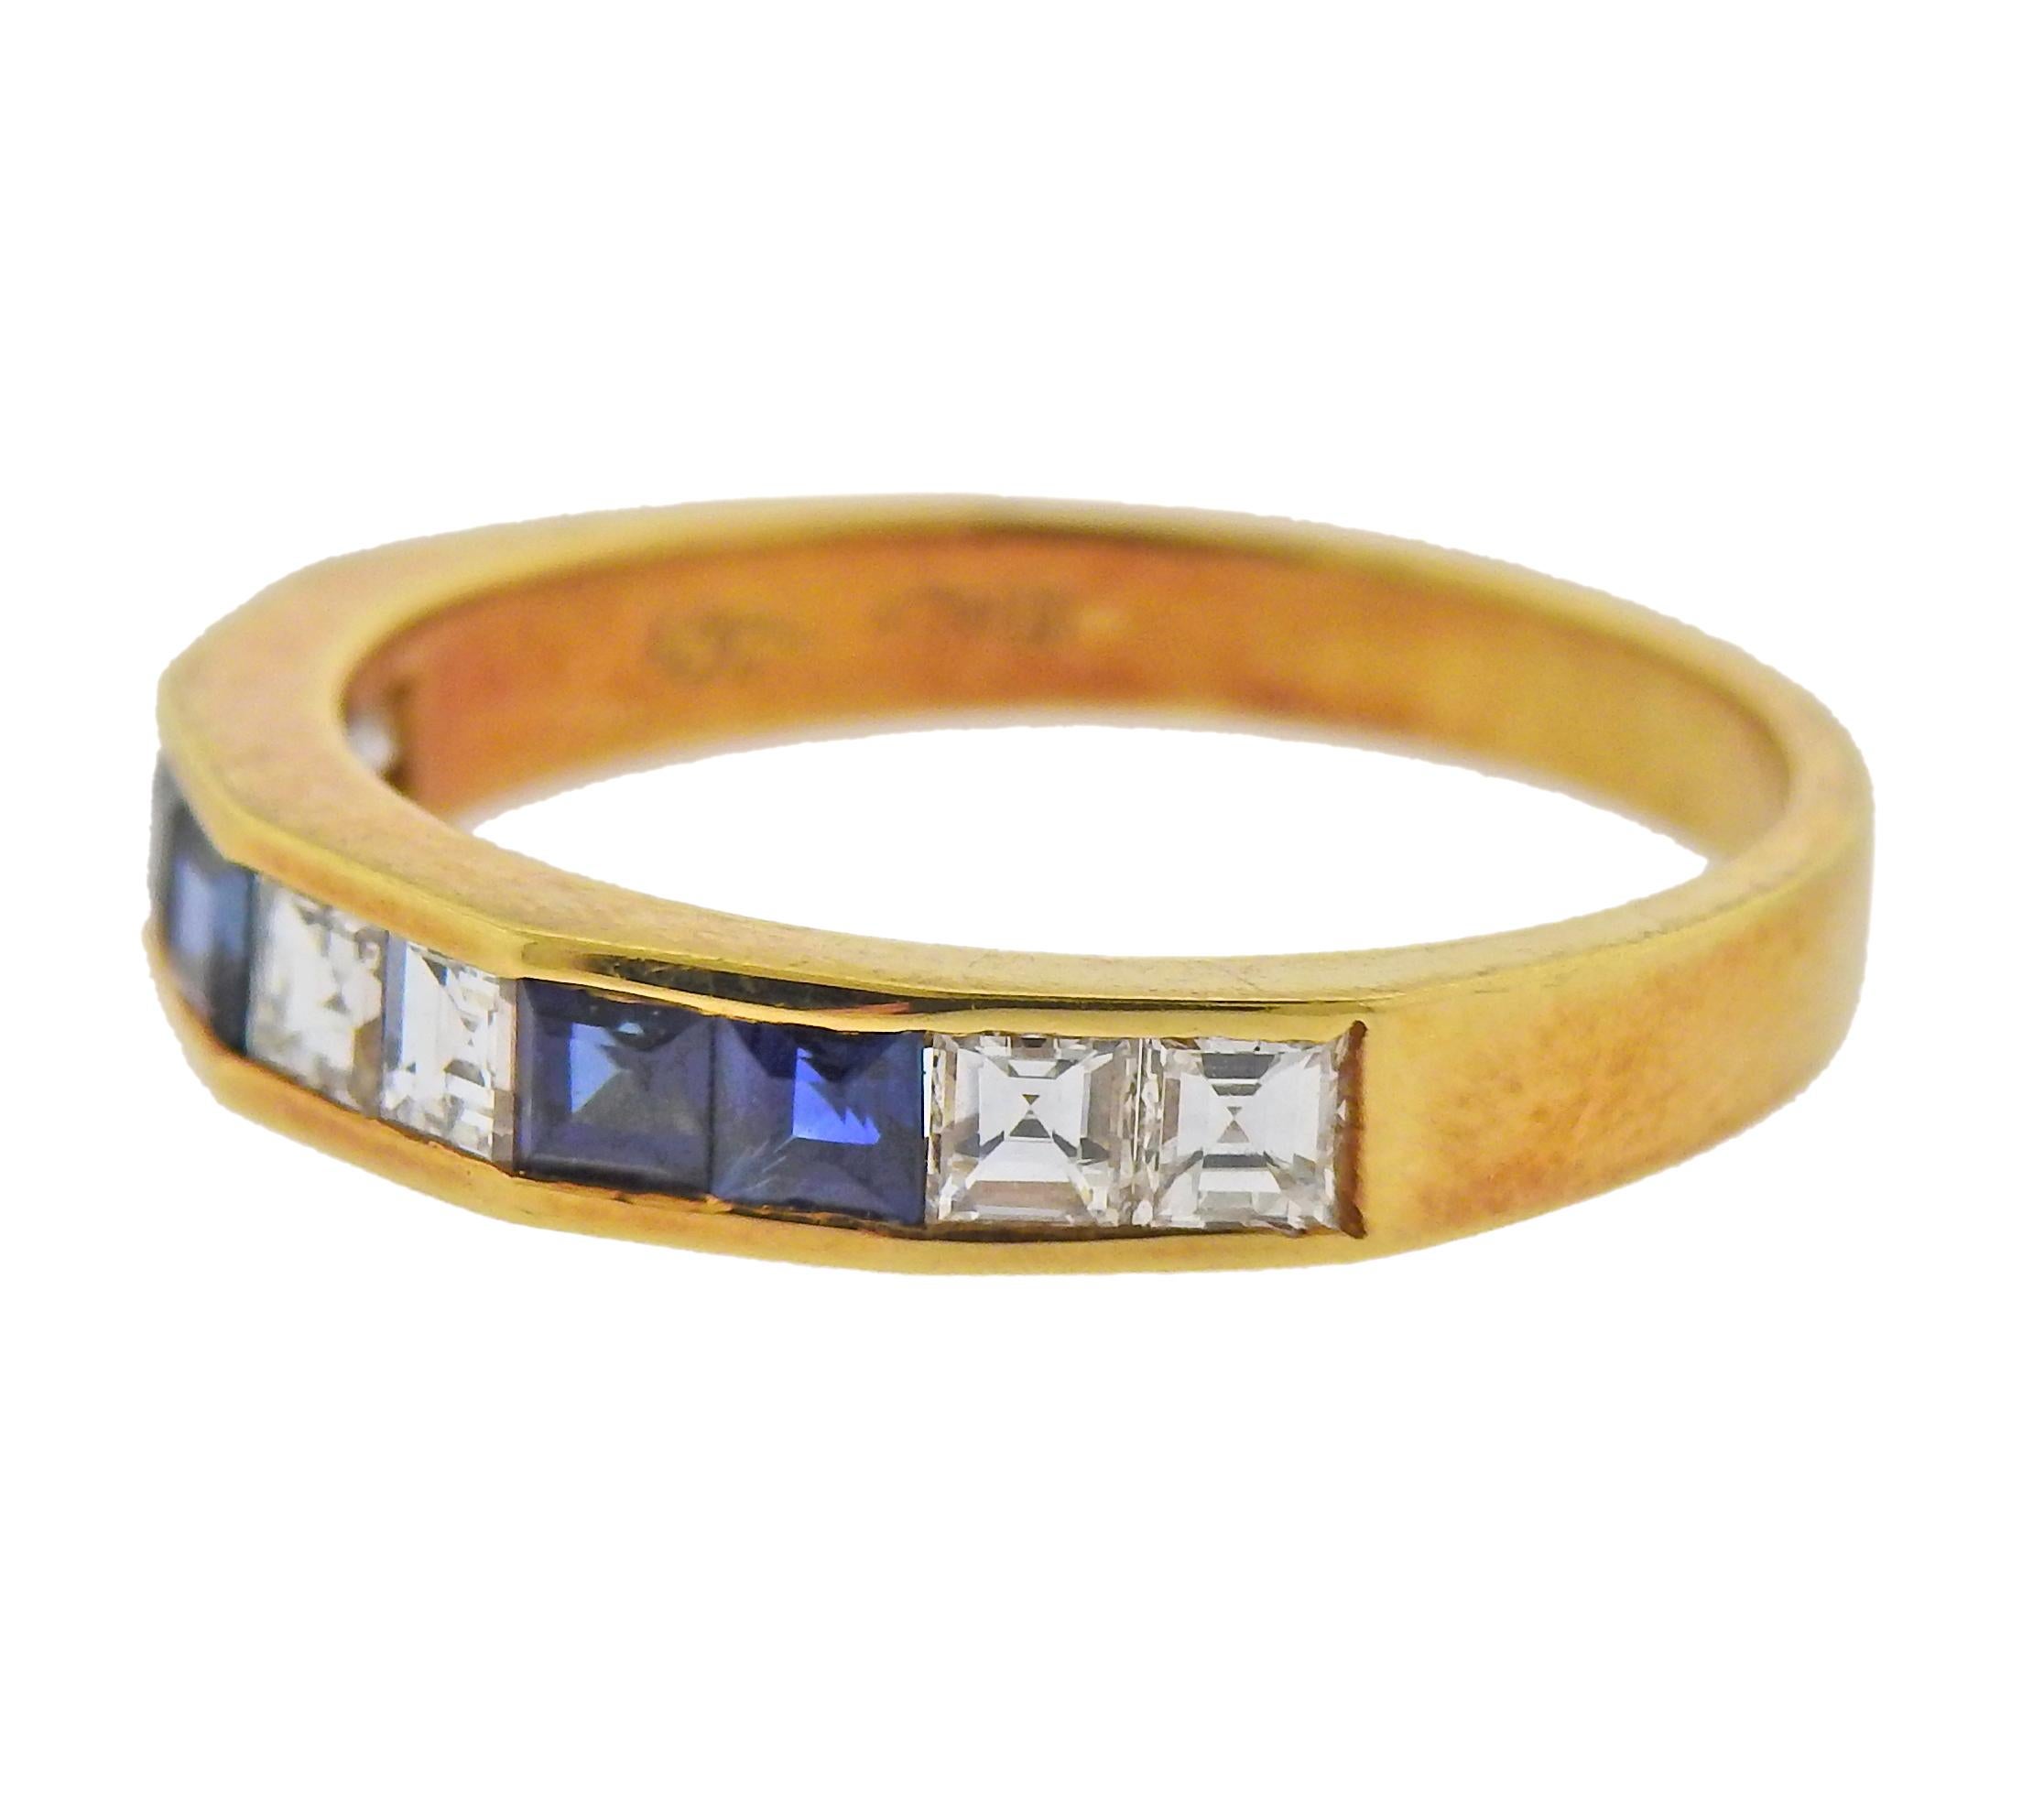 18k gold ring with alternating sapphires and diamonds (approx. 0.48ctw). Ring size - 6.75, ring is 3.8mm wide. Marked: Italy, 750. Weight - 3.4 grams.